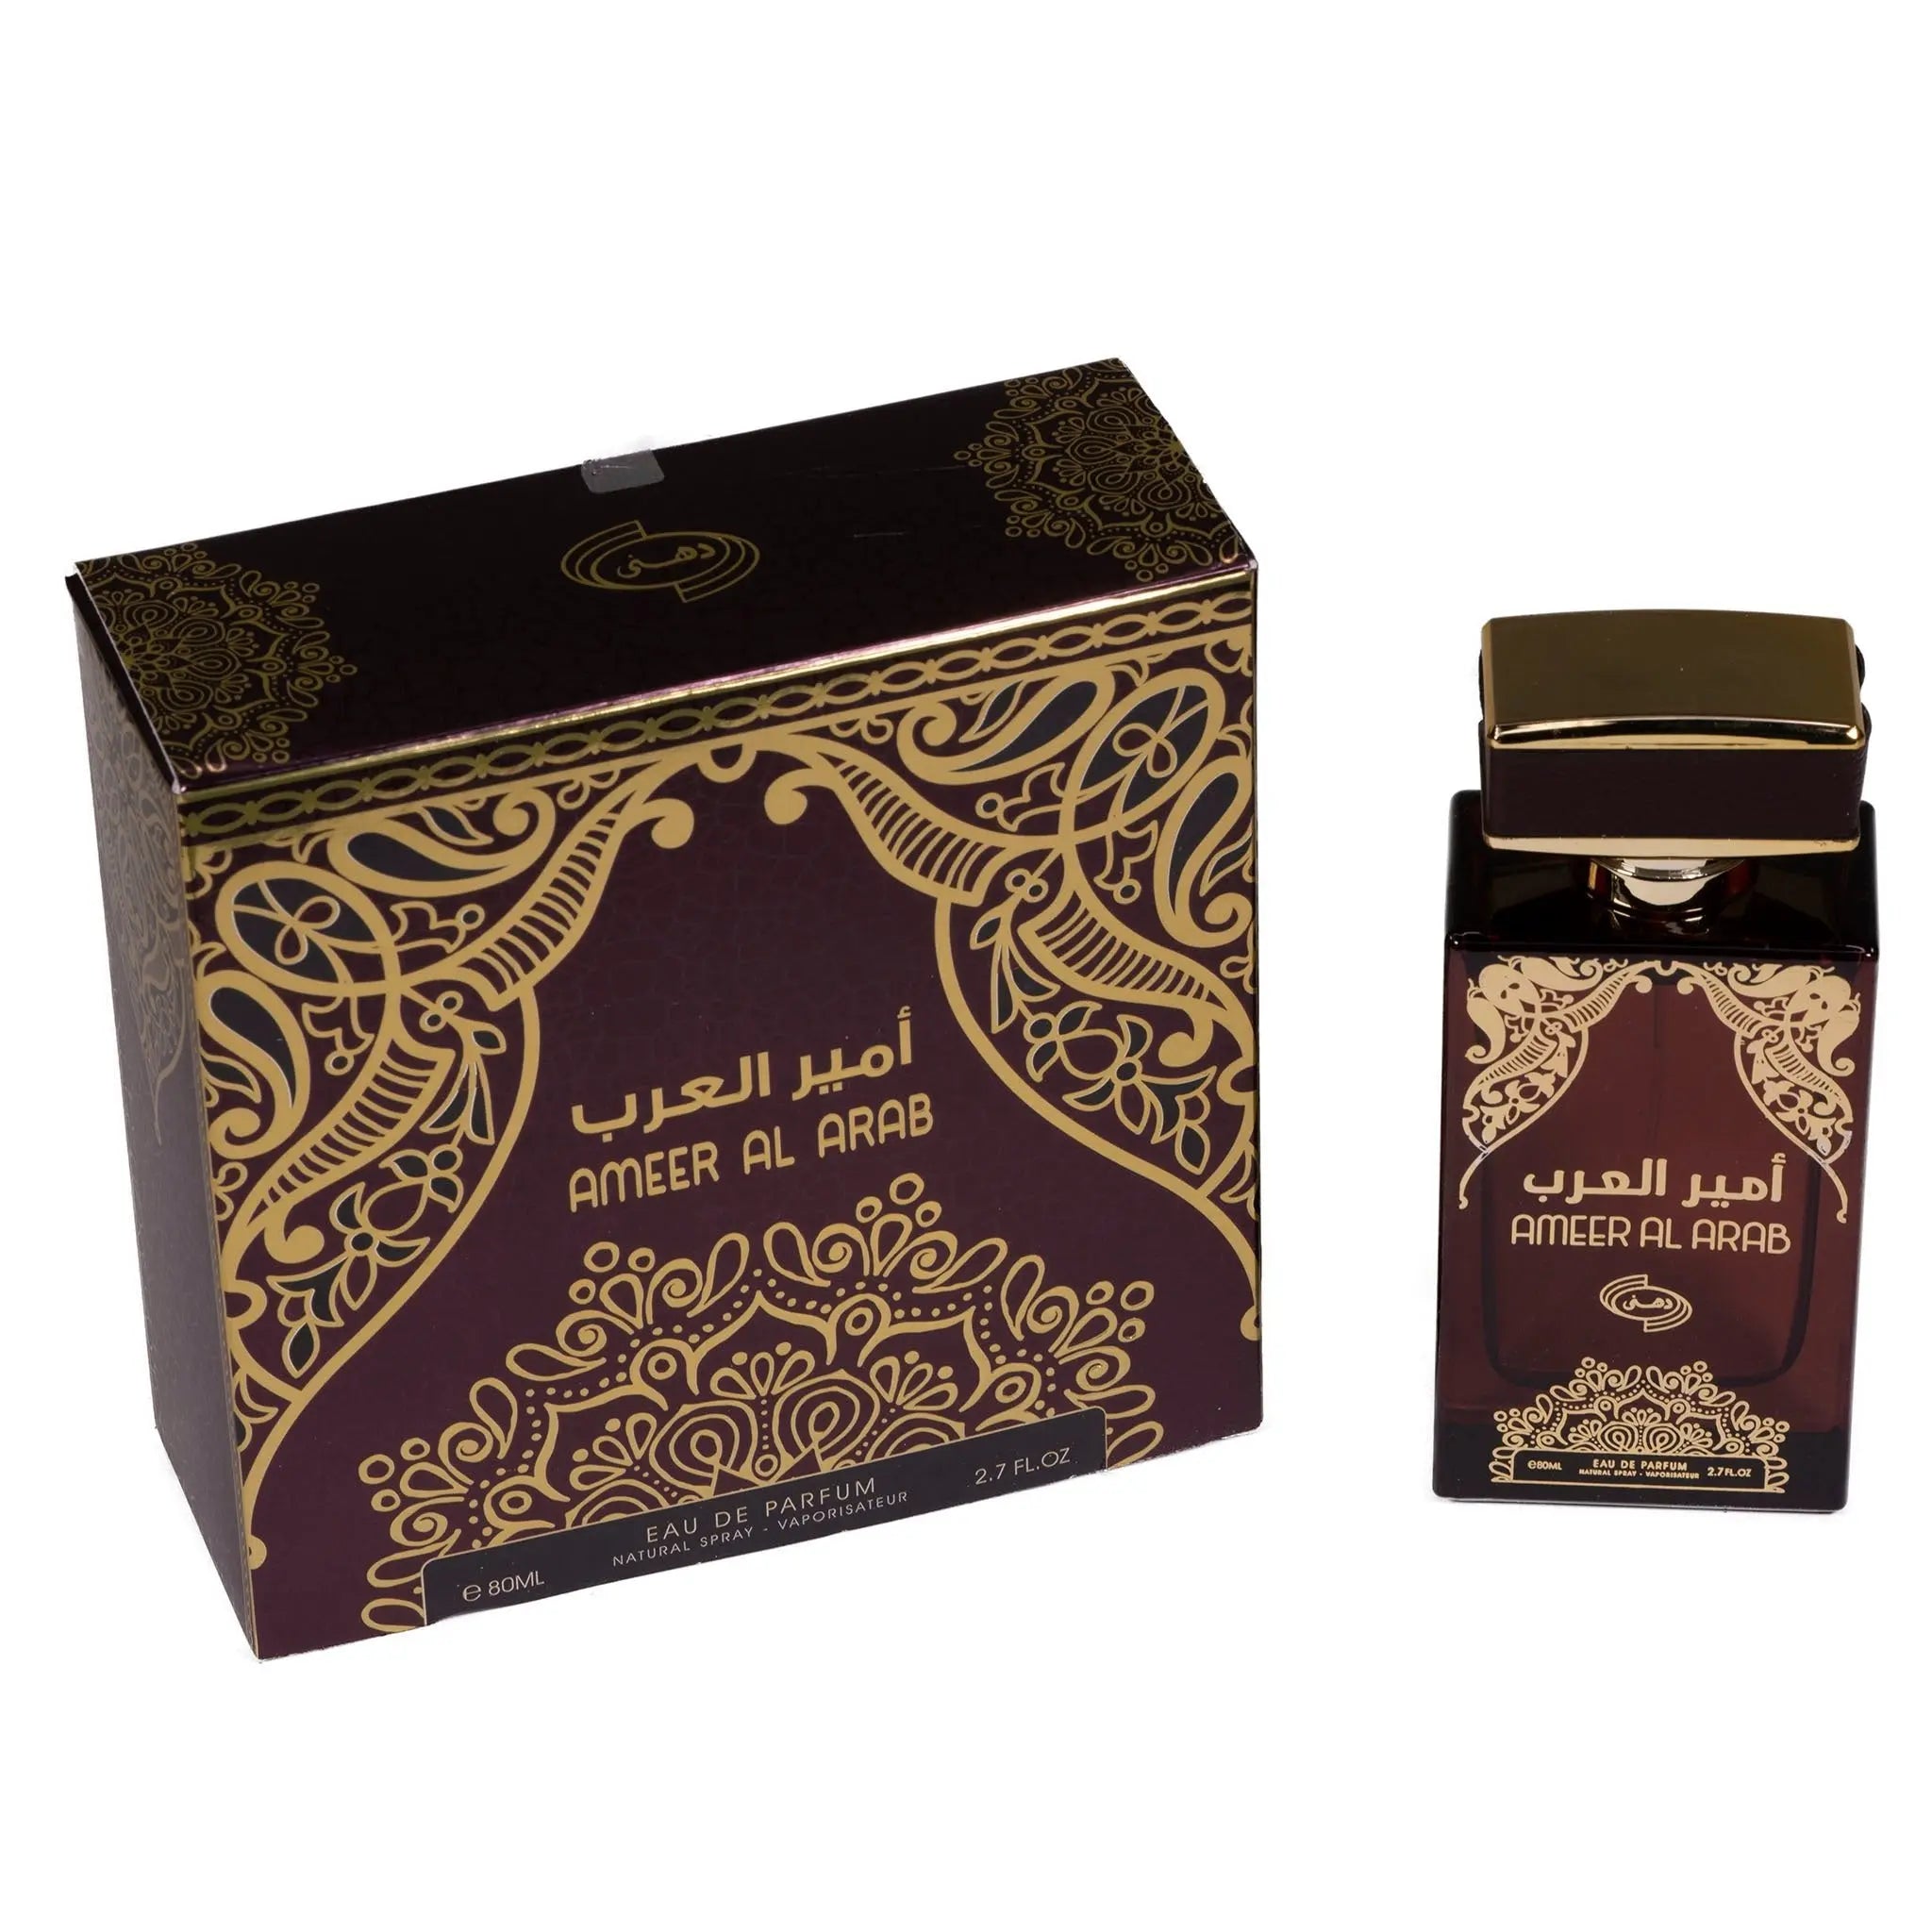 A dark brown glass perfume bottle with a gold and black cap, labeled "AMEER AL ARAB" in both Arabic and English script. The bottle is placed next to its box, which has a maroon background with intricate gold Arabic patterns and calligraphy. The box also has the text "AMEER AL ARAB," the volume "80ML EAU DE PARFUM 2.7 FL.OZ," and a logo on top. Both items are on a plain white background.